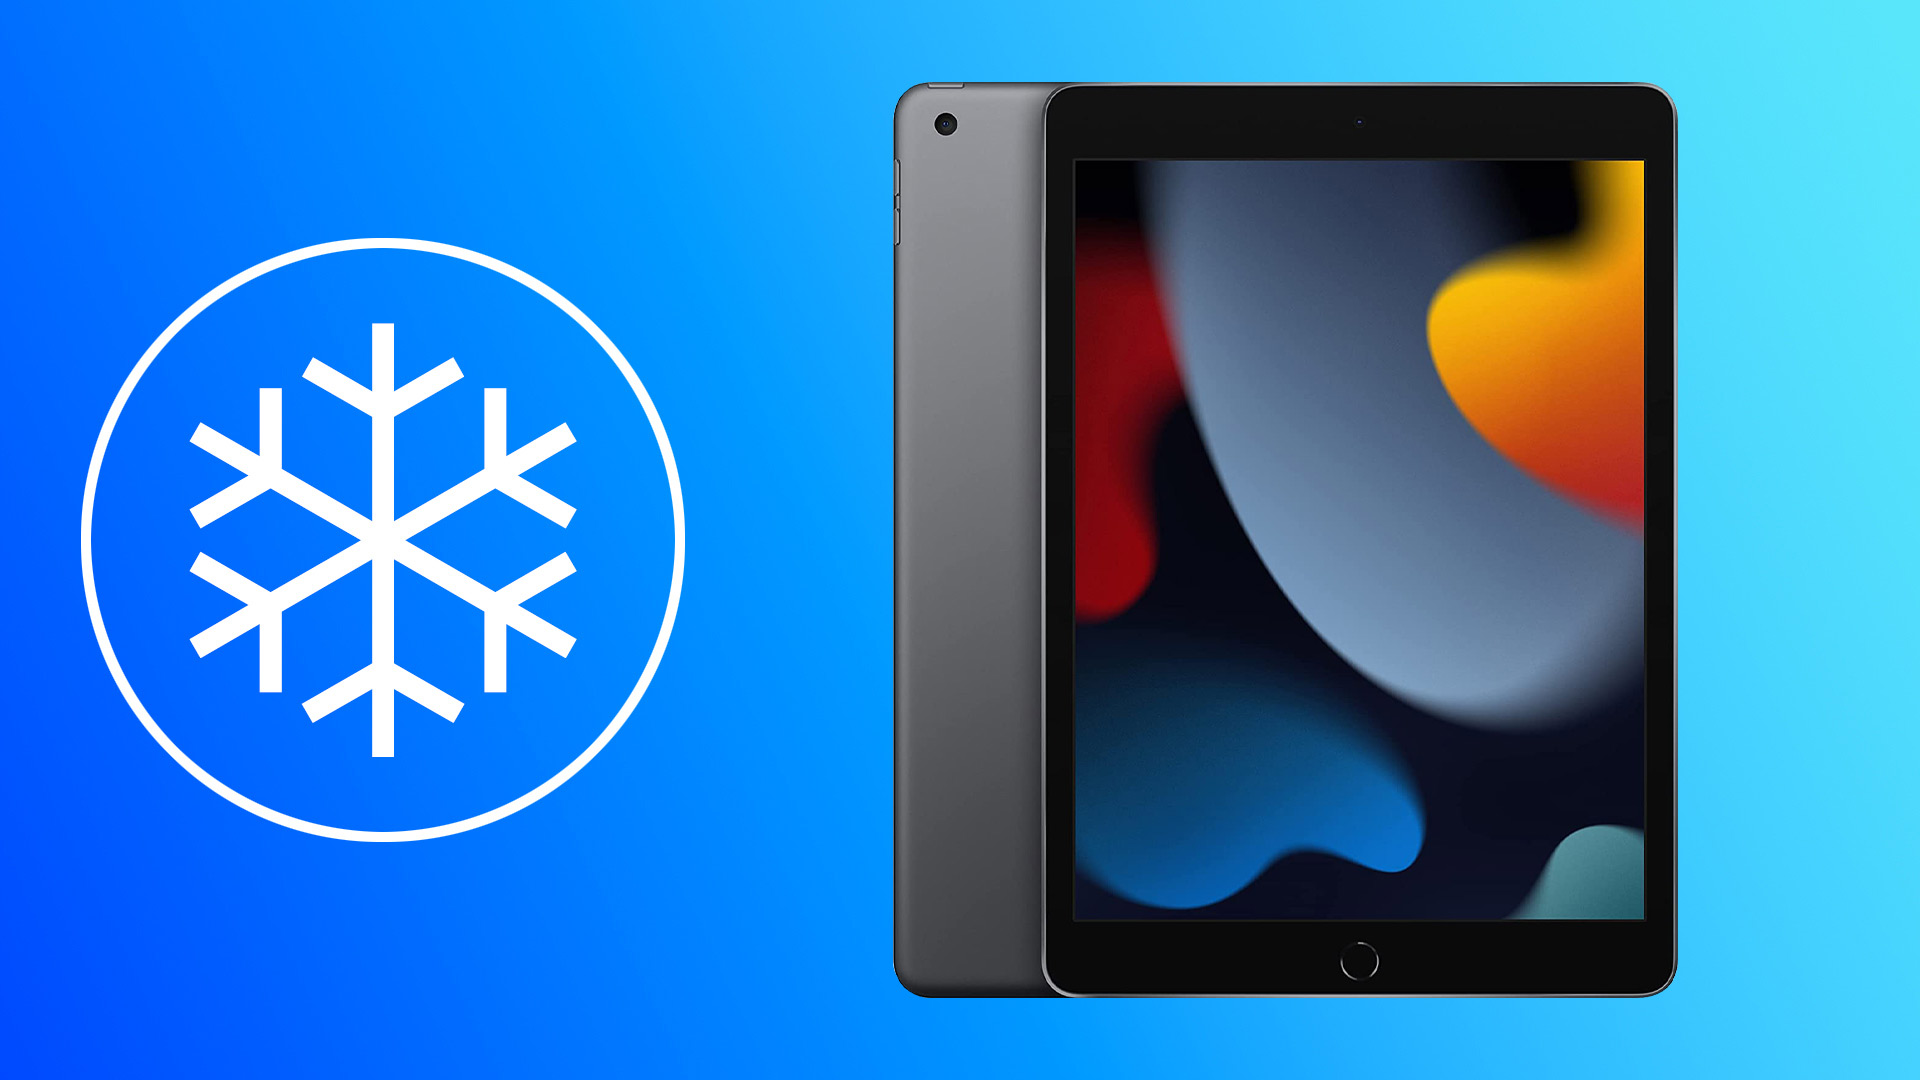 iPad 10.2 (2021) on a blue background with a snowflake logo